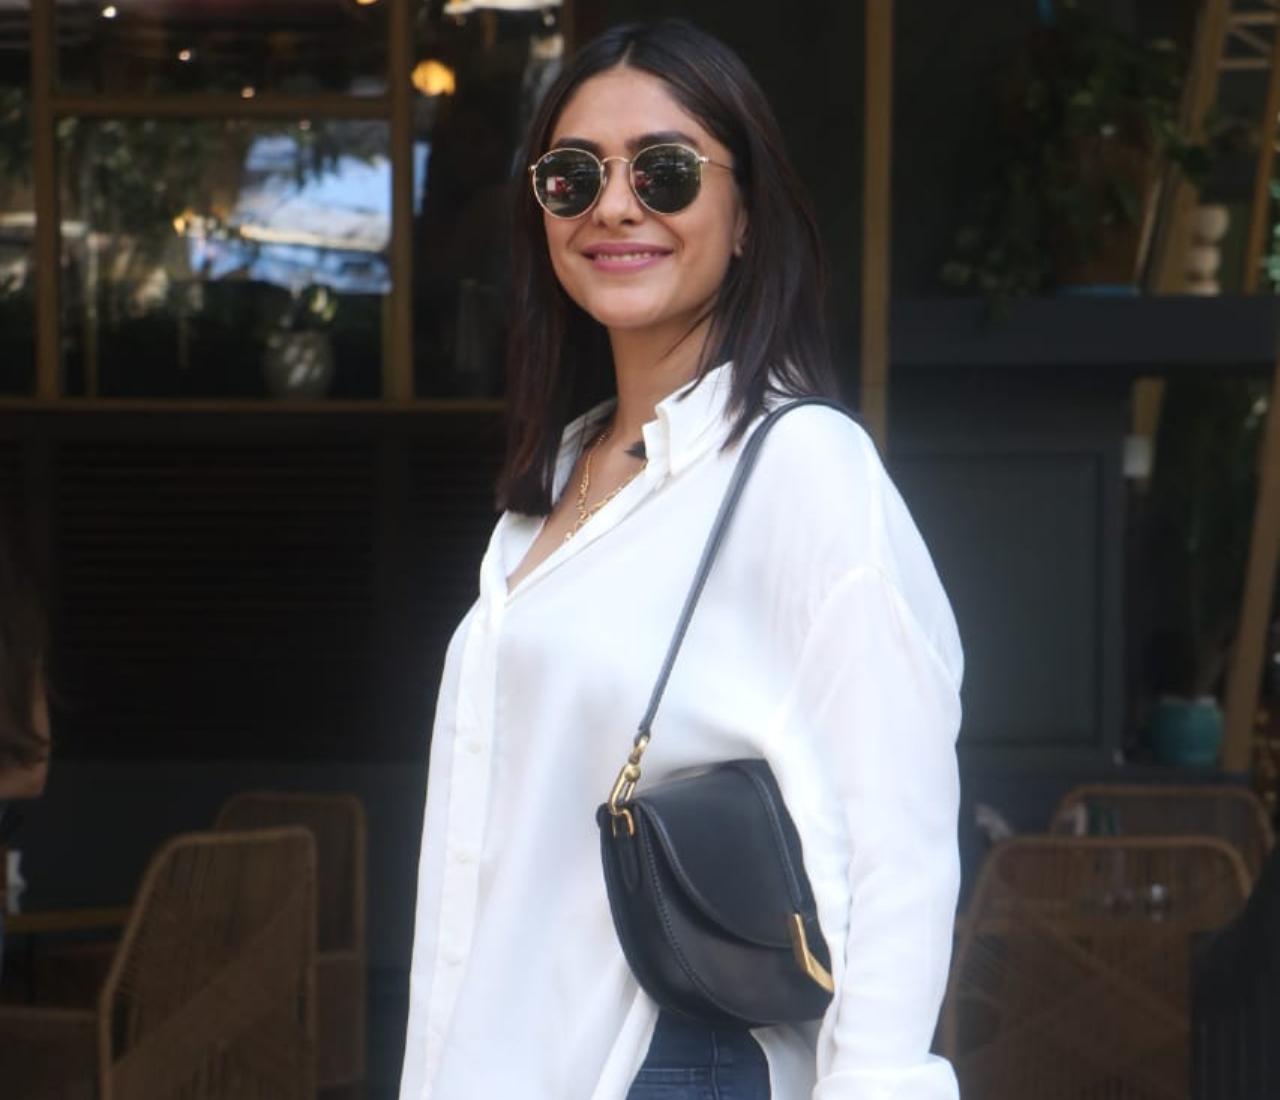 Mrunal Thakur happily posed for the photographers in a white shirt and pants in Juhu.